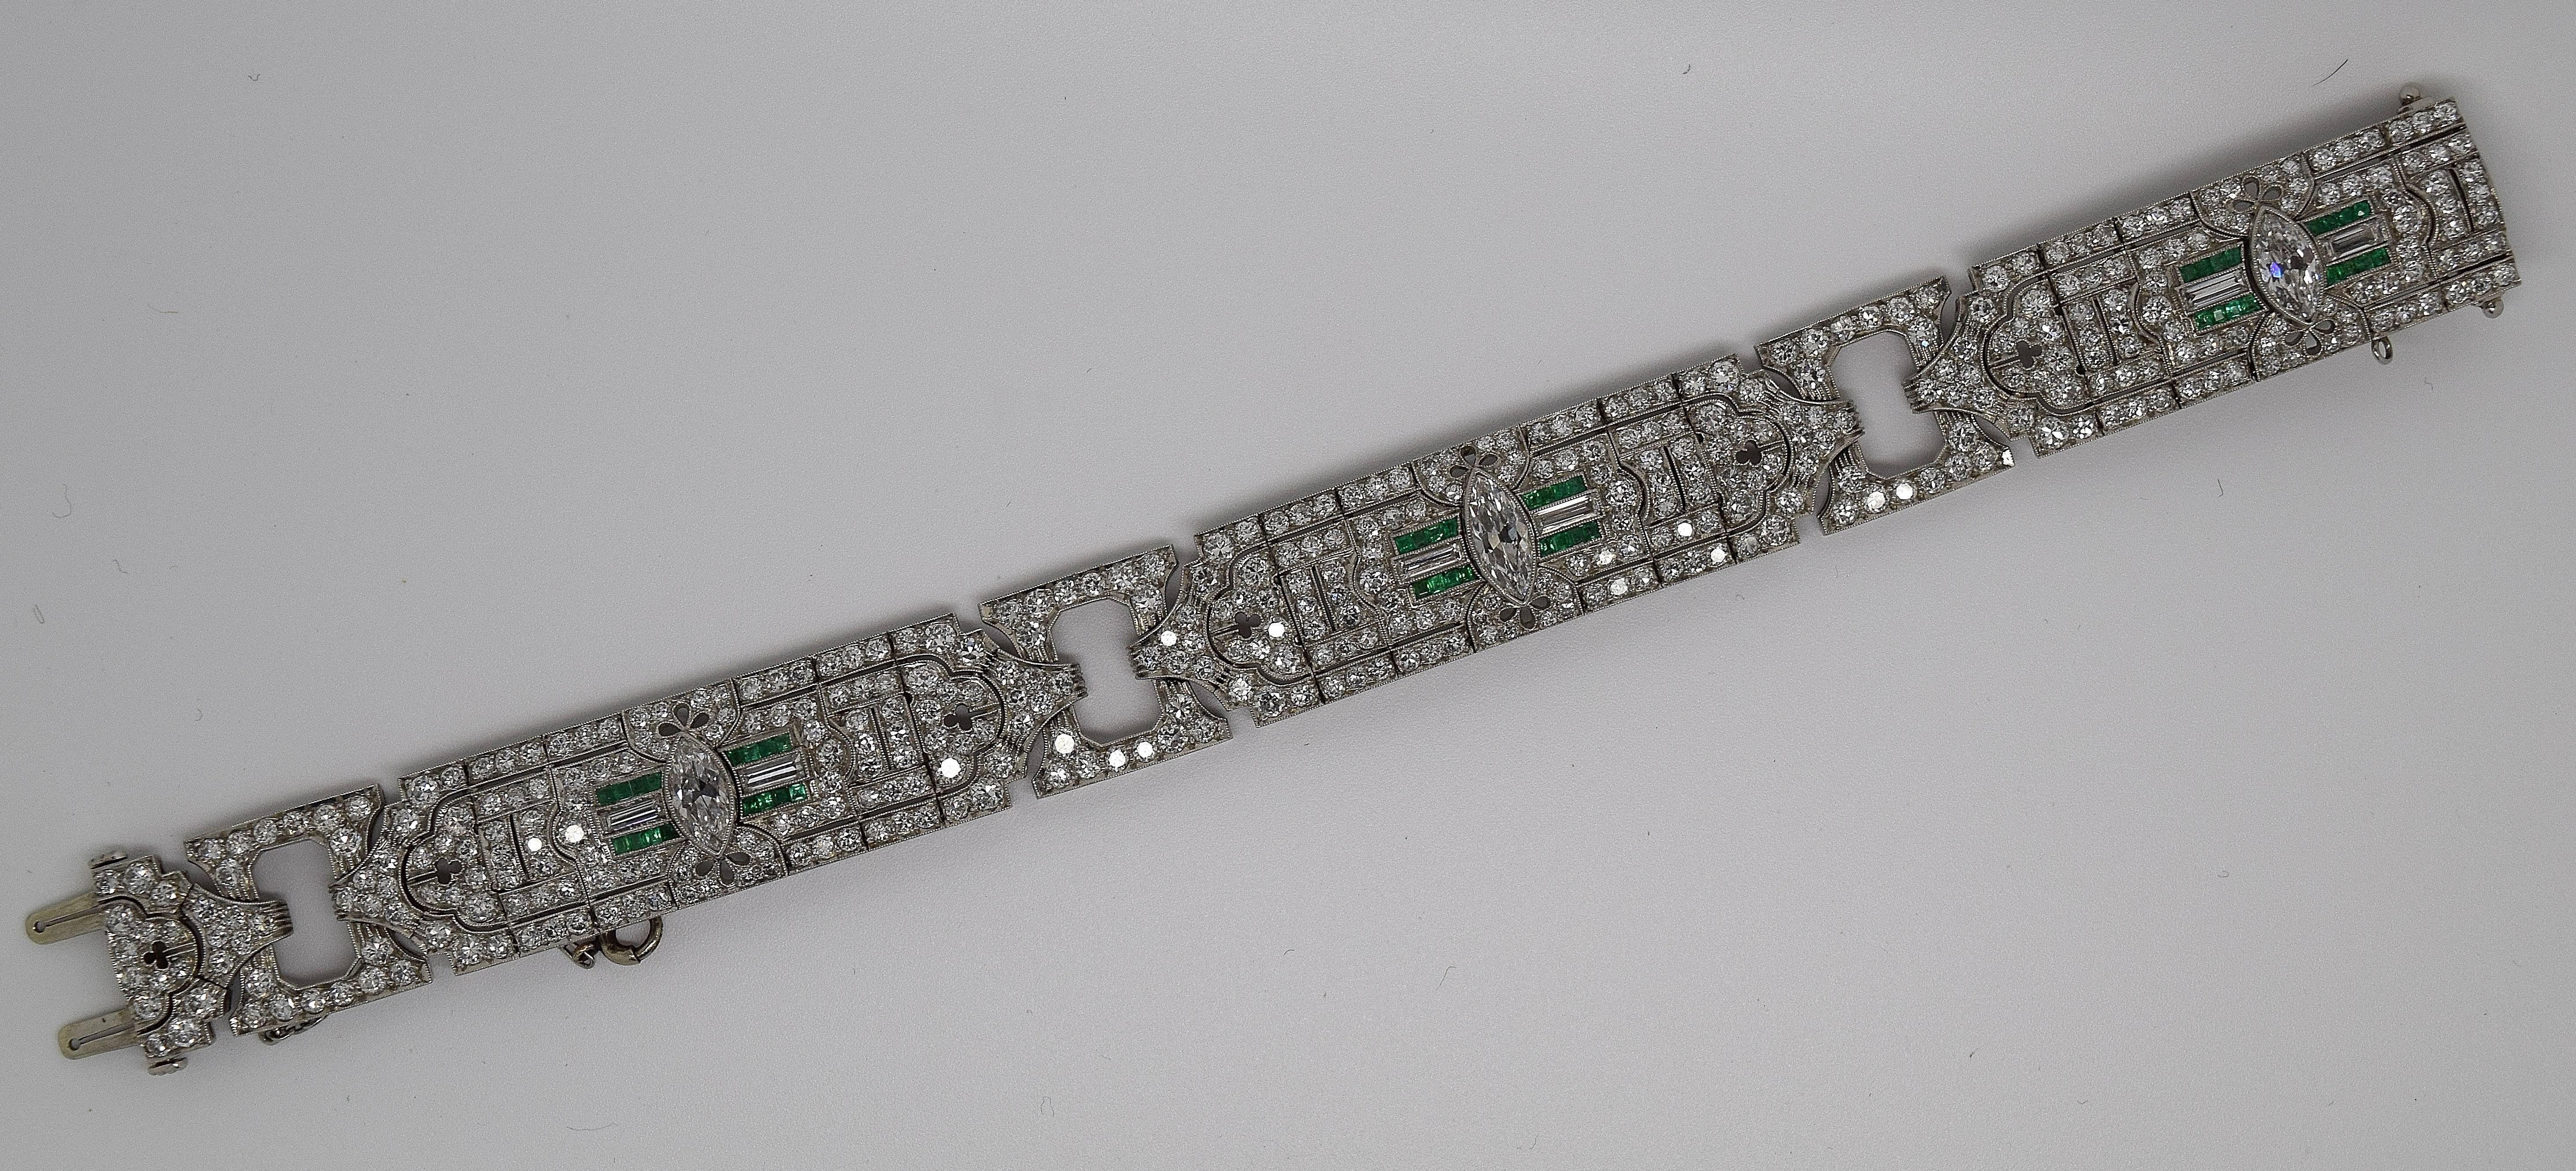 Stunning Art Deco diamond and emerald bracelet set in platinum. The three center marquise cut diamonds weigh approximately 3.75cttw and are approximately G/H color and VS2 clarity. The 432 side old cut diamonds are hand set in platinum filigree and